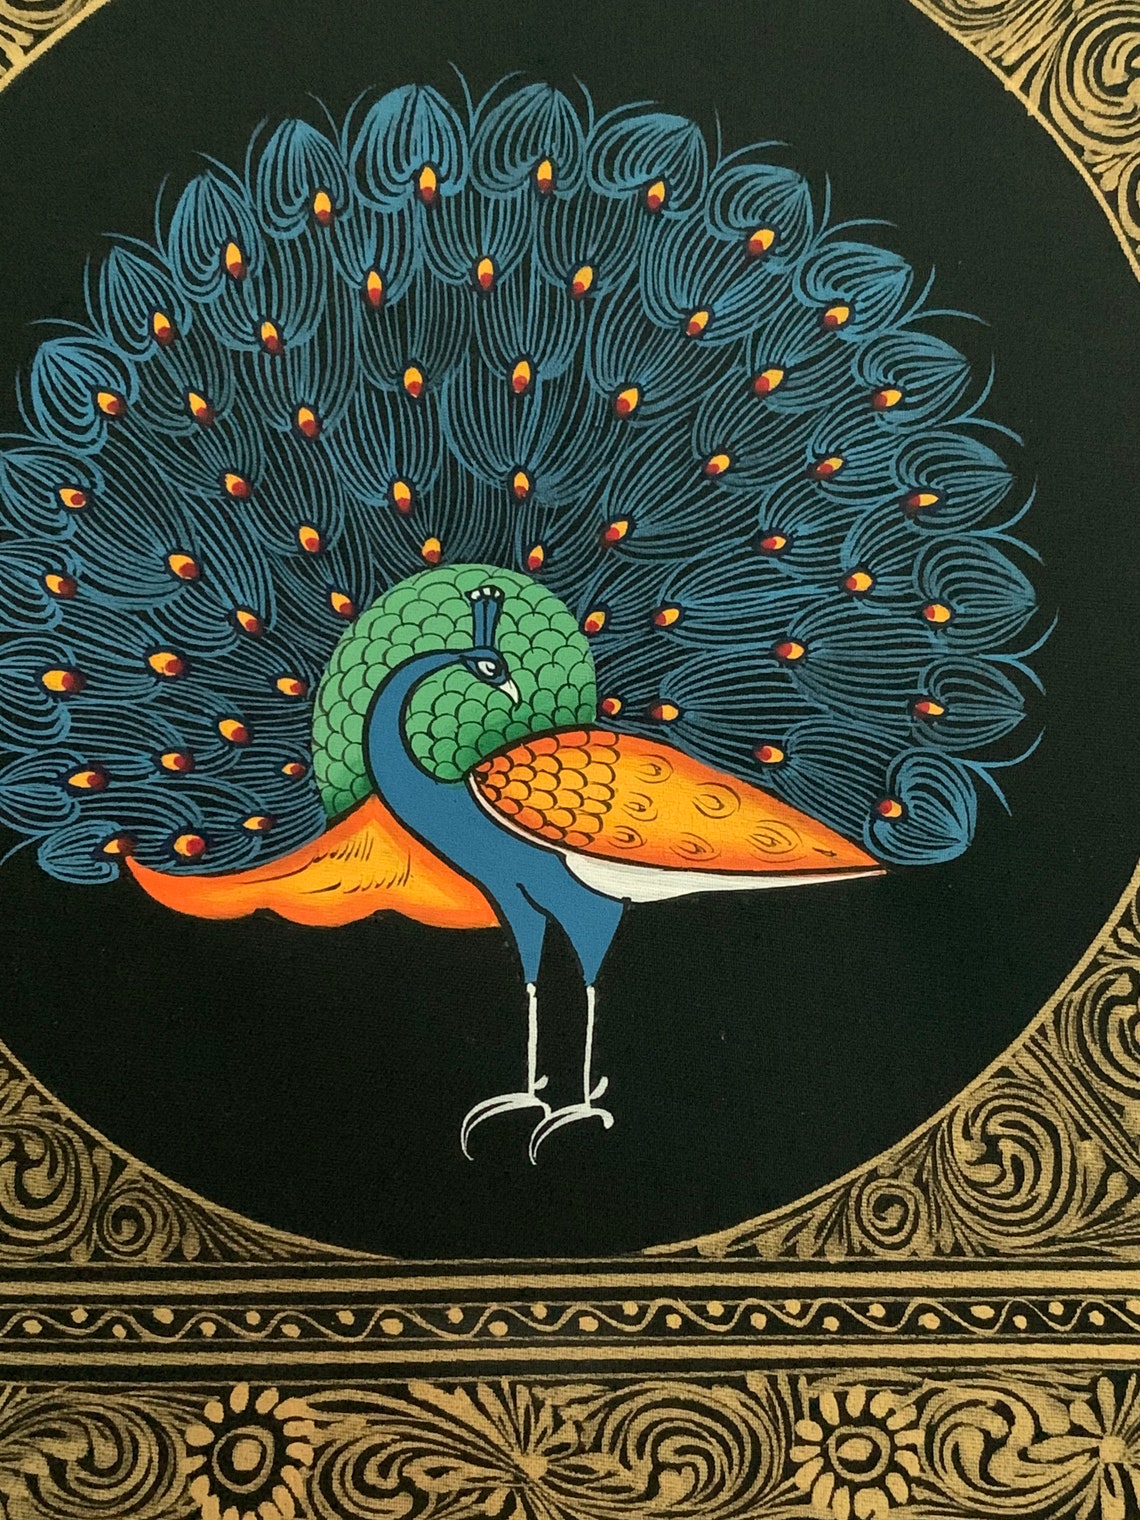 Peacock Miniature Silk Paintings Mughal Art Work in Size 6 by - Etsy